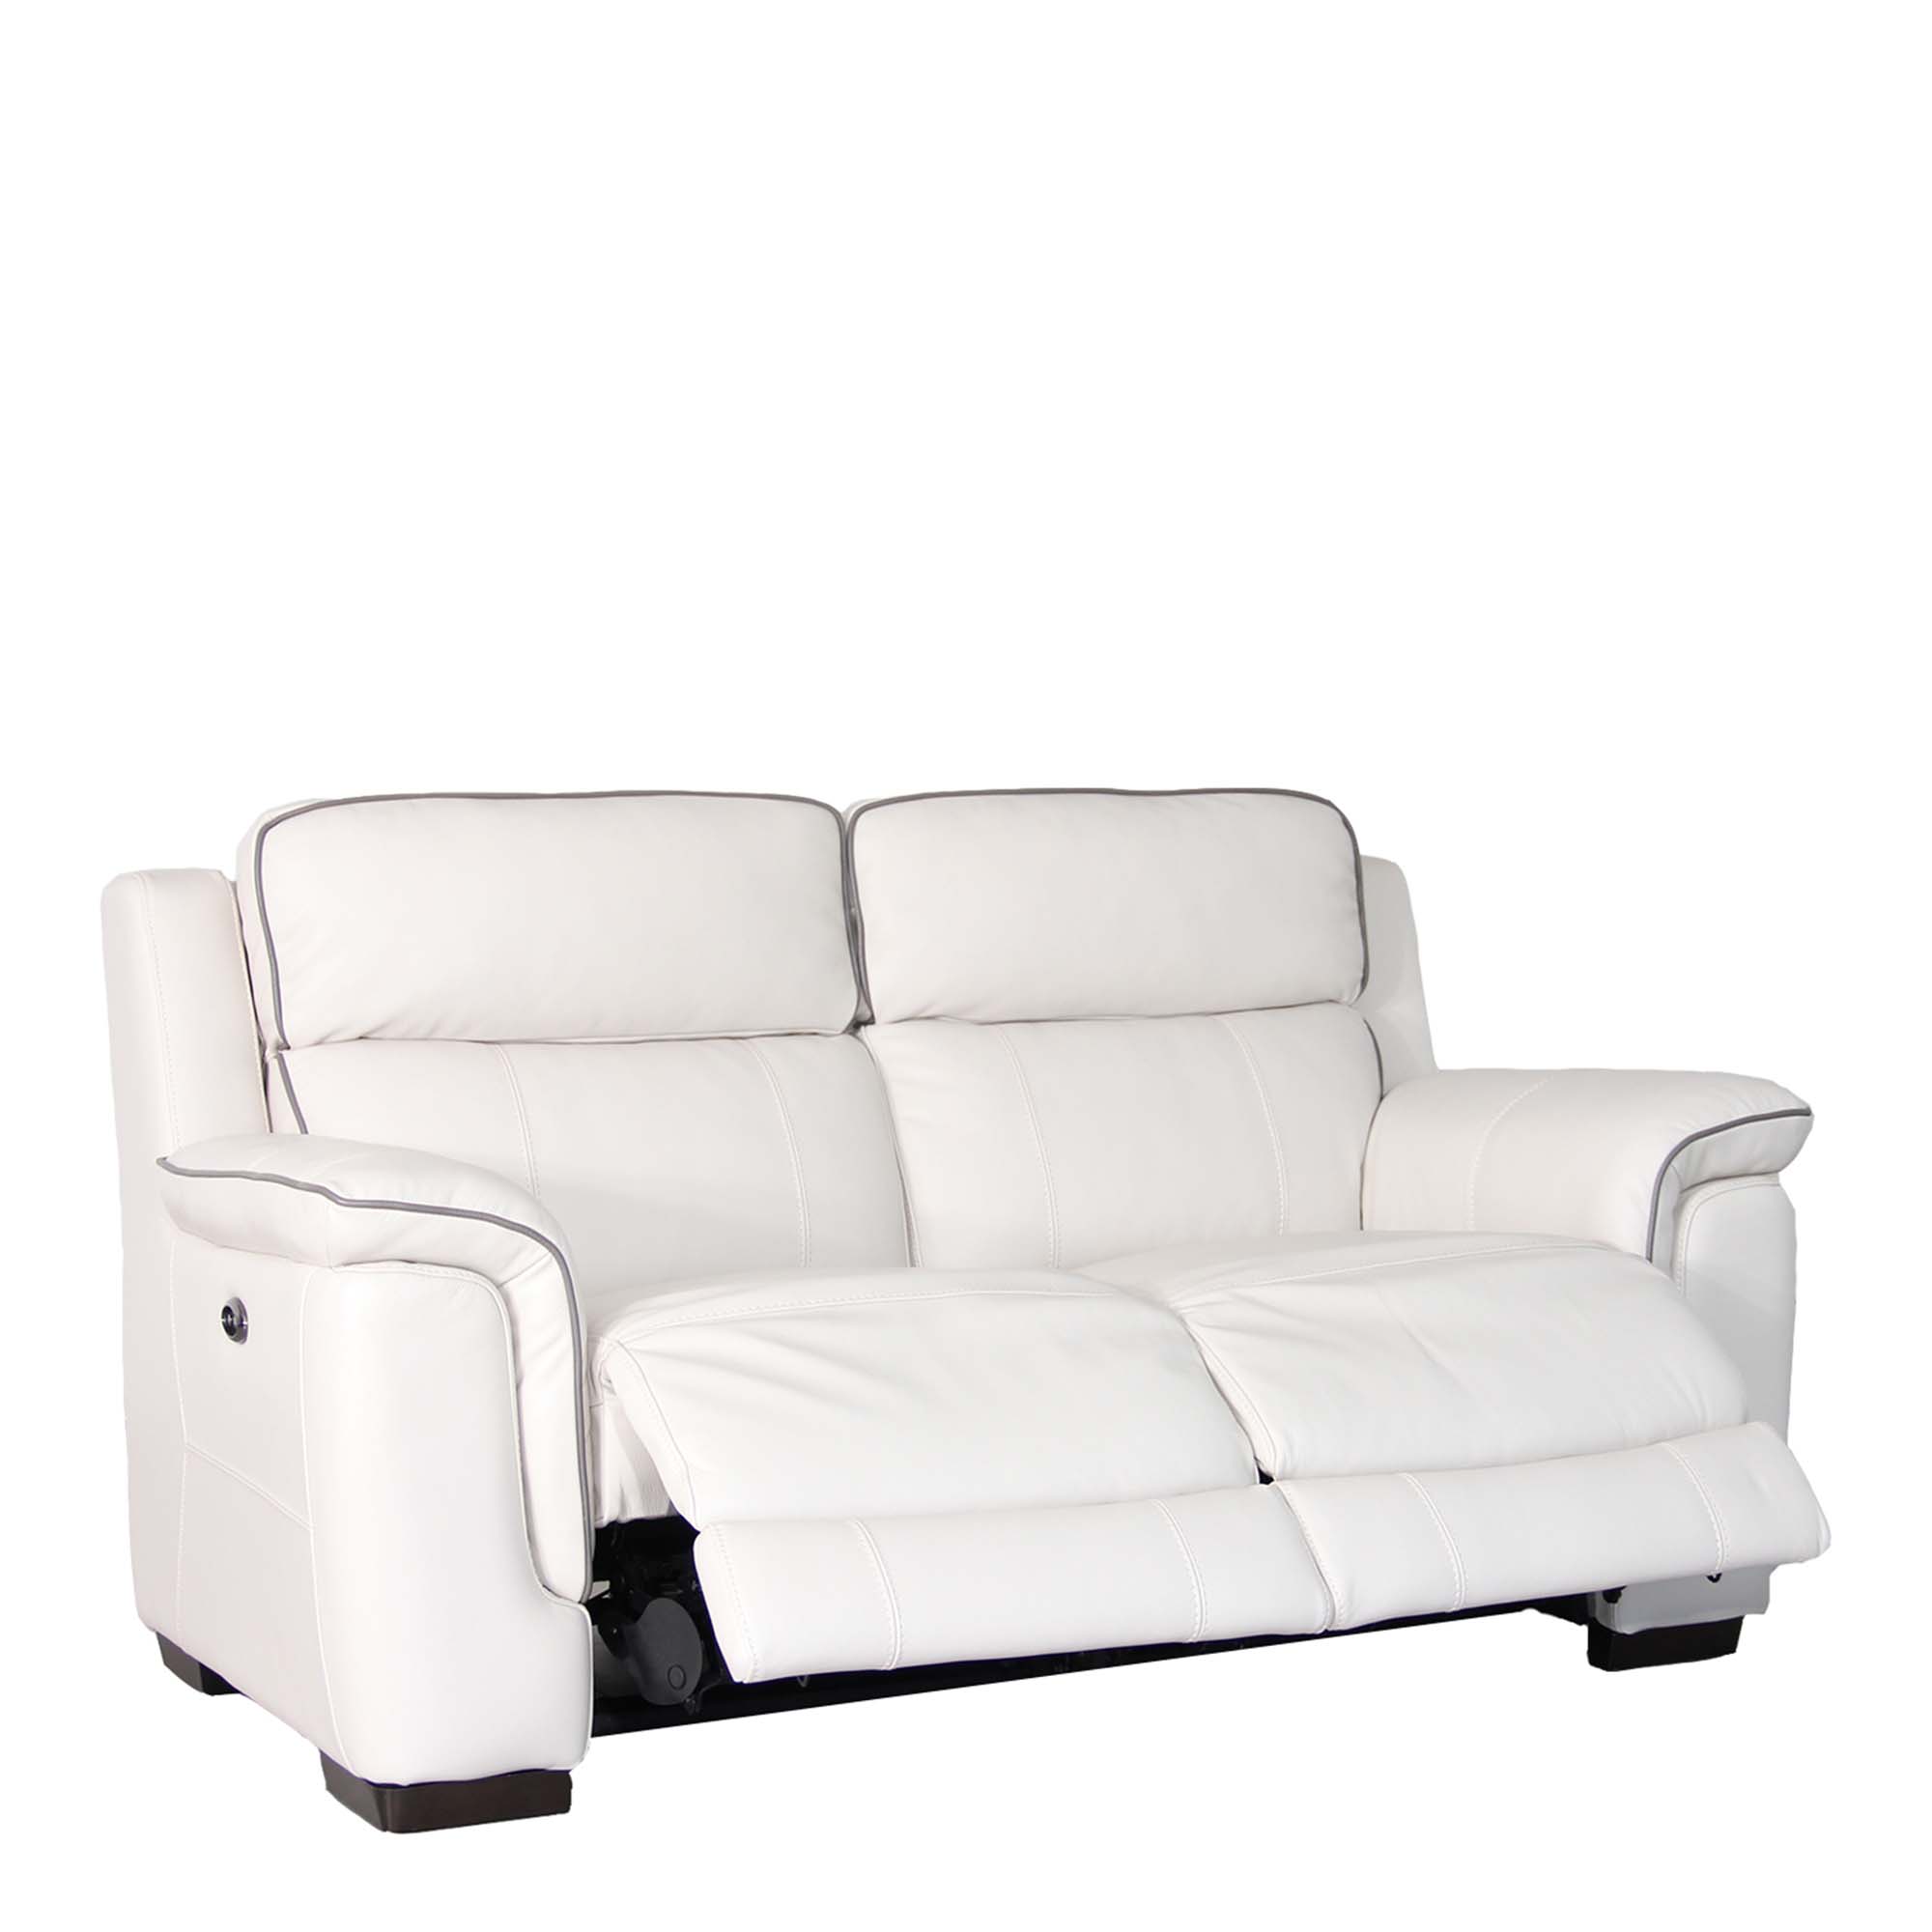 Monza Leather - 2 Seat Sofa With Double Power Recliner In Cat 25/Full Leather